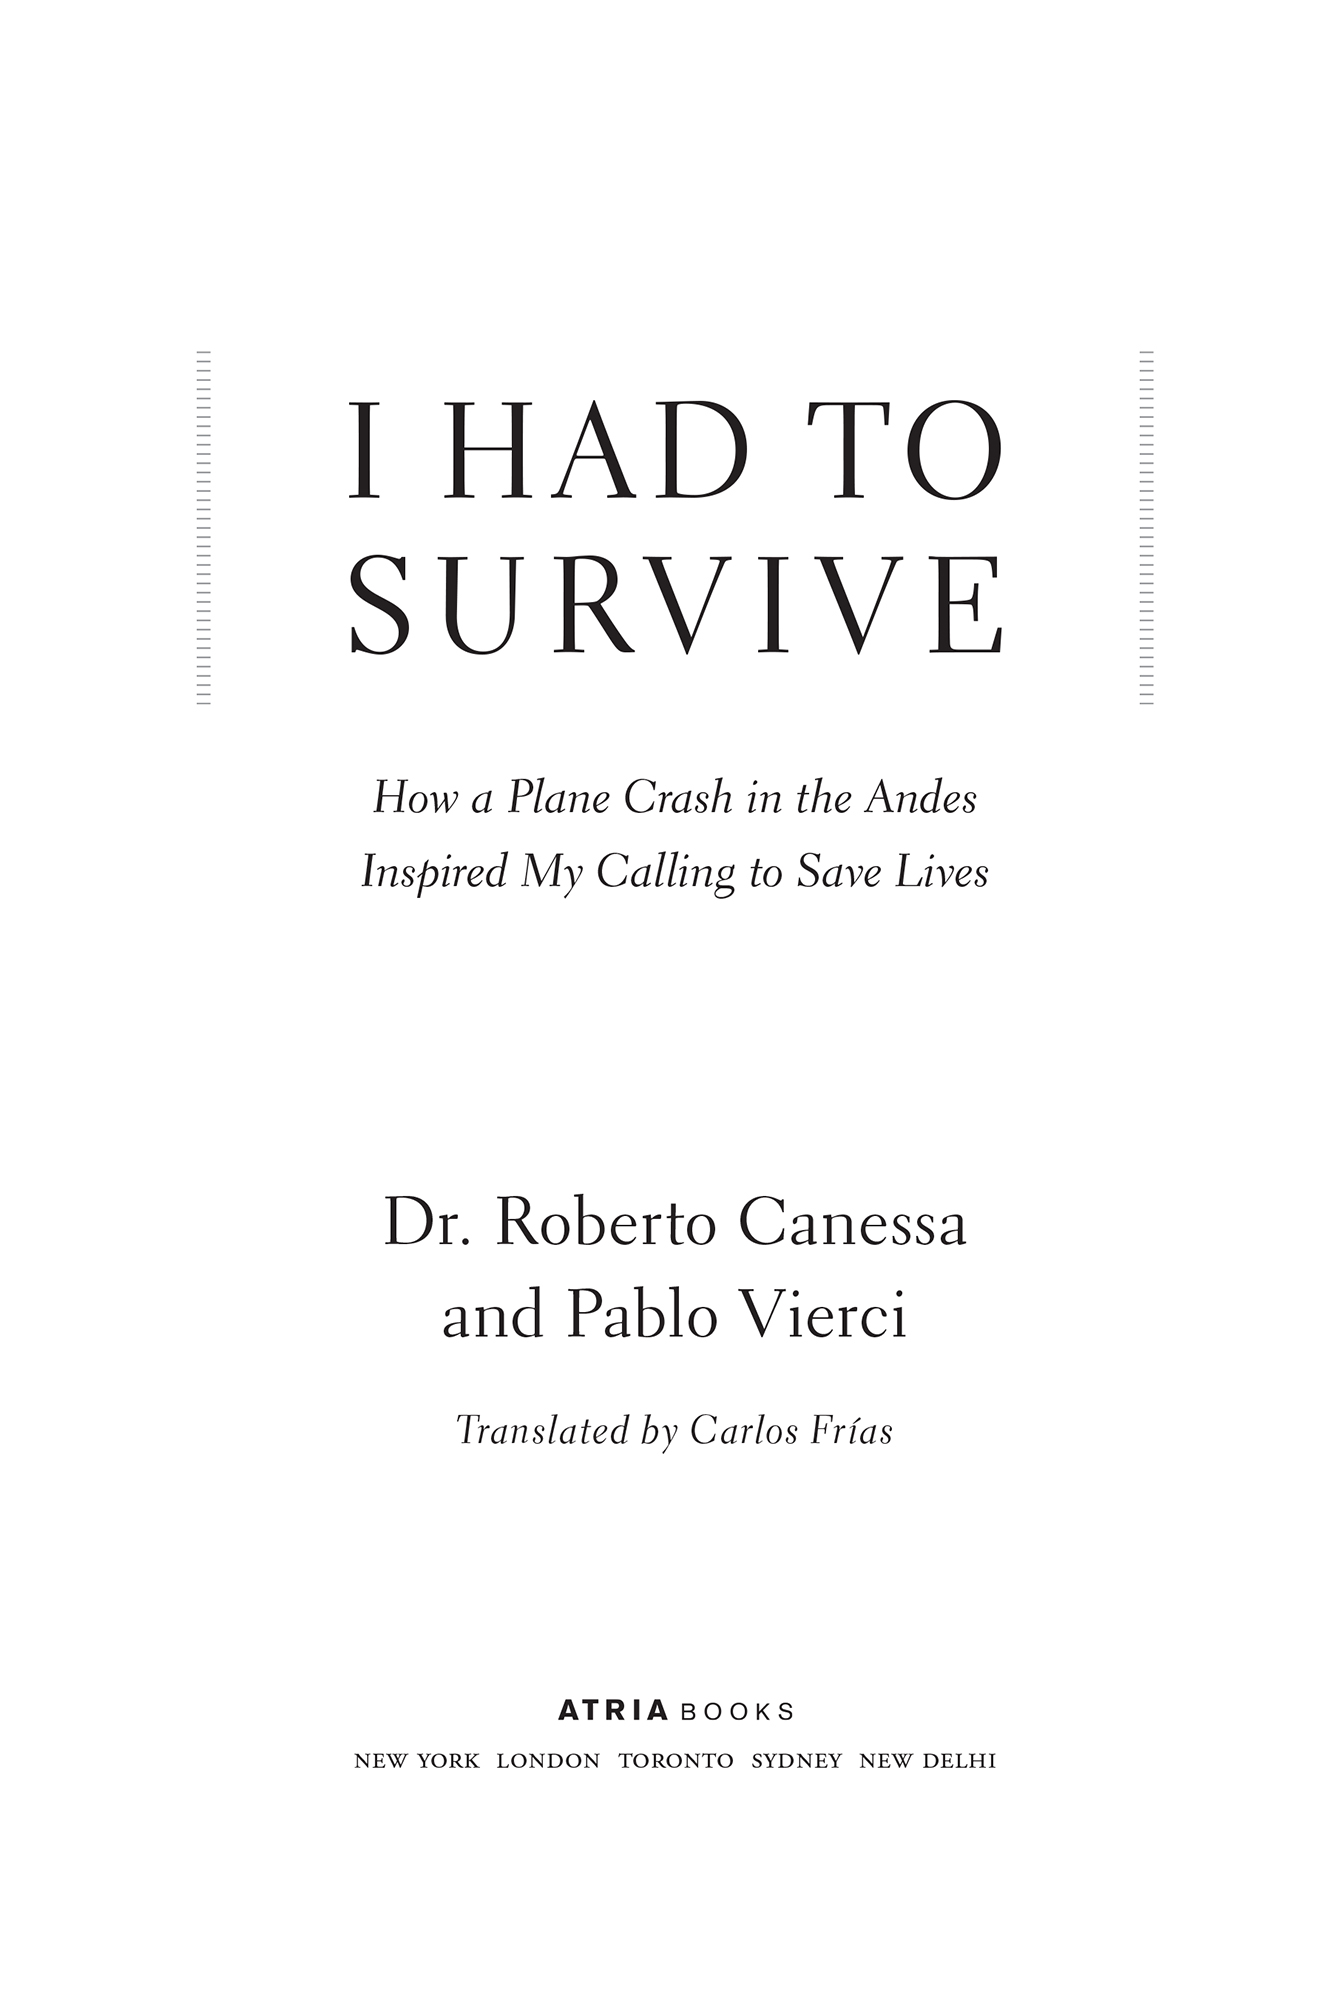 I had to survive how a plane crash in the Andes inspired my calling to save lives - image 1